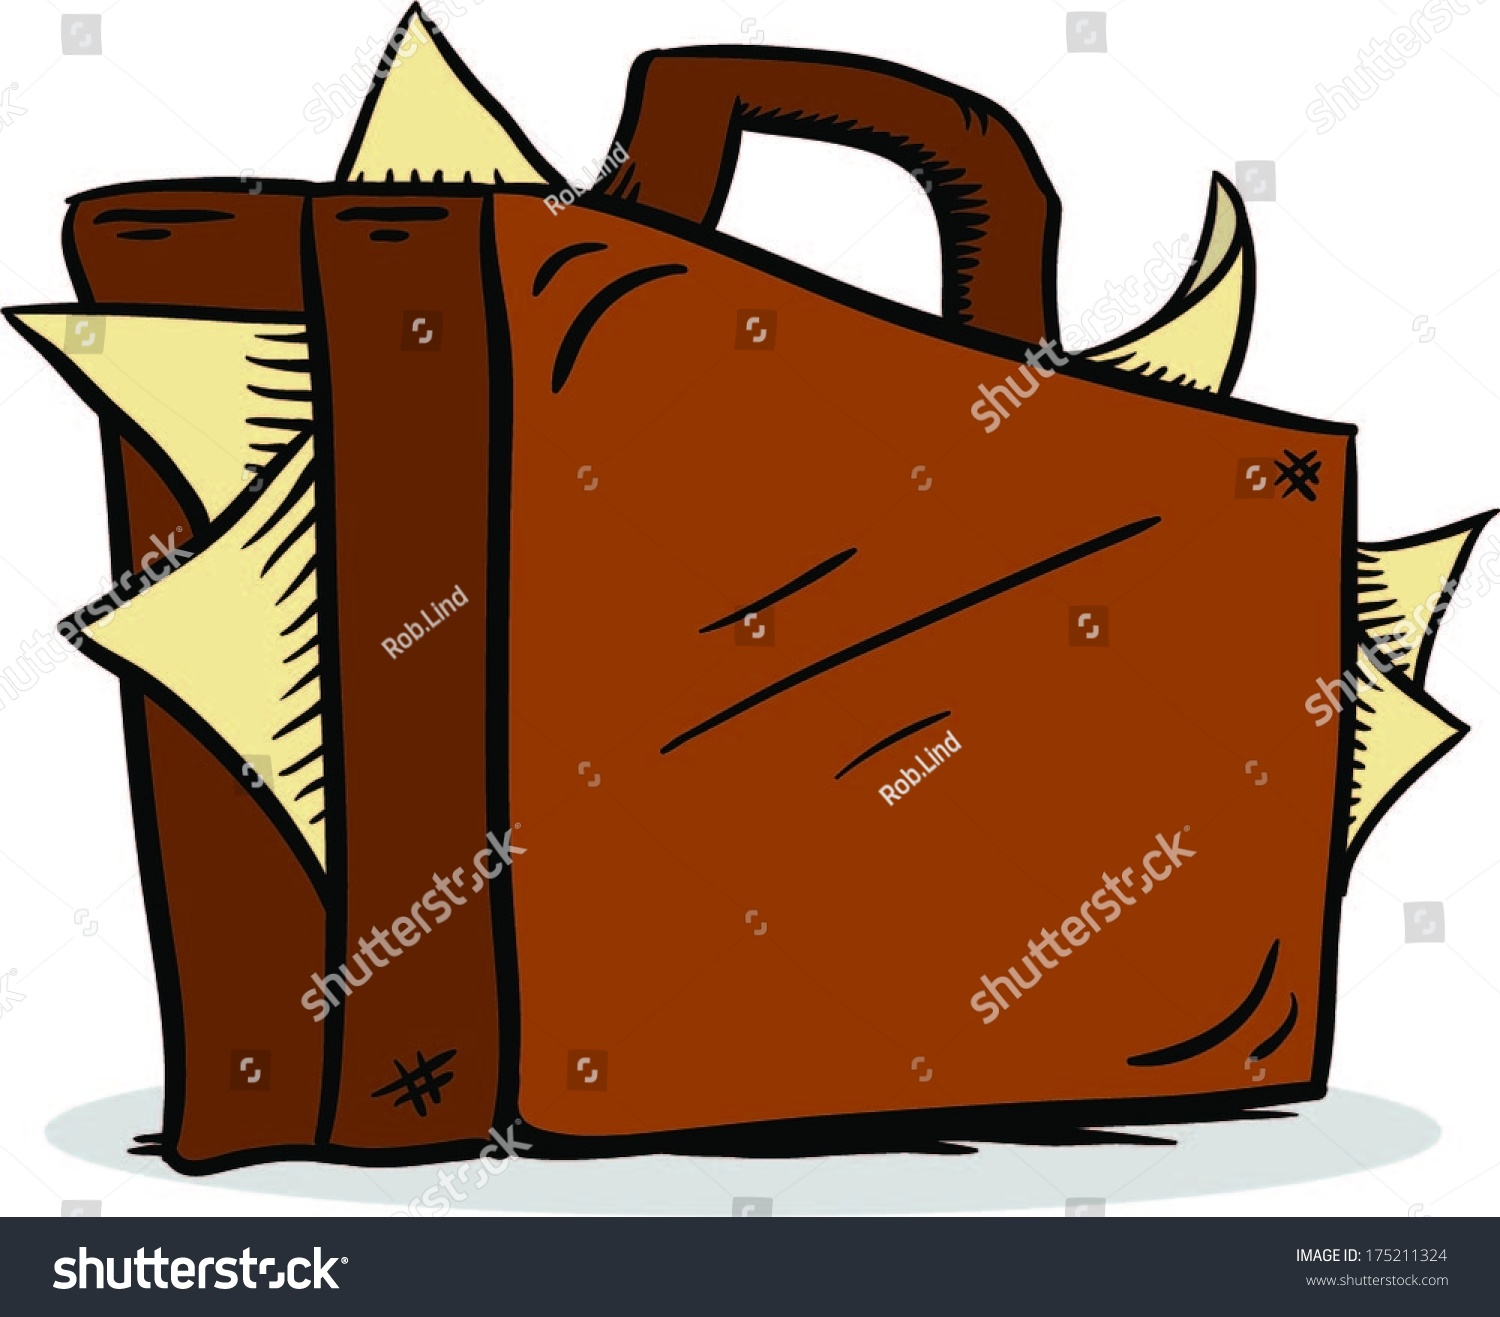 Cartoon Briefcase Papers Sticking Out : image vectorielle de stock